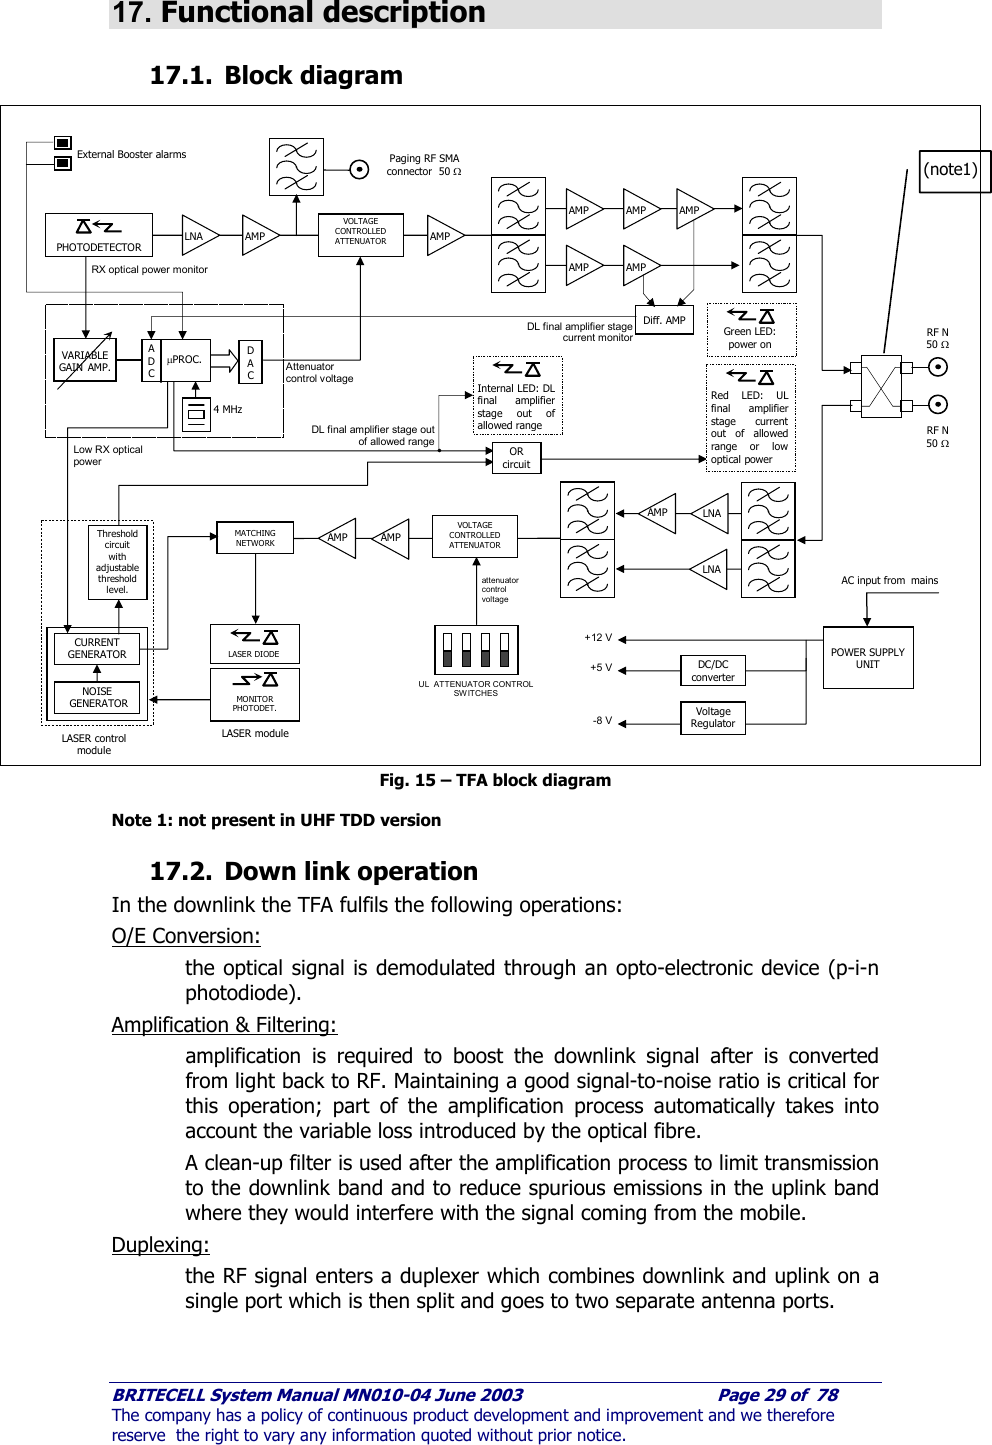     BRITECELL System Manual MN010-04 June 2003                                        Page 29 of  78 The company has a policy of continuous product development and improvement and we therefore reserve  the right to vary any information quoted without prior notice.  17. Functional description 17.1. Block diagram                            Fig. 15 – TFA block diagram  Note 1: not present in UHF TDD version 17.2. Down link operation In the downlink the TFA fulfils the following operations: O/E Conversion:  the optical signal is demodulated through an opto-electronic device (p-i-n photodiode). Amplification &amp; Filtering:  amplification is required to boost the downlink signal after is converted from light back to RF. Maintaining a good signal-to-noise ratio is critical for this operation; part of the amplification process automatically takes into account the variable loss introduced by the optical fibre. A clean-up filter is used after the amplification process to limit transmission to the downlink band and to reduce spurious emissions in the uplink band where they would interfere with the signal coming from the mobile.  Duplexing:  the RF signal enters a duplexer which combines downlink and uplink on a single port which is then split and goes to two separate antenna ports.  PHOTODETECTOR LNA  AMP Paging RF SMA connector  50 Ω VOLTAGE CONTROLLED ATTENUATOR  AMP AMP AMP AMP AMP AMP VARIABLE GAIN AMP. D A CA D C µPROC. 4 MHz Diff. AMP NOISE   GENERATOR LASER module MONITOR PHOTODET. LASER DIODE VOLTAGE CONTROLLED ATTENUATOR AMP AMP MATCHING NETWORK UL  ATTENUATOR CONTROL SWITCHES attenuator control voltage DL final amplifier stage current monitor LNA AMP  LNA Green LED: power on Red LED: UL final amplifier stage current out of allowed range or low optical power RF N 50 Ω RF N 50 Ω POWER SUPPLY UNIT AC input from mains DC/DC converter Voltage Regulator  RX optical power monitor Attenuator control voltage DL final amplifier stage out of allowed range Threshold circuit with adjustable threshold level. Low RX optical power CURRENT GENERATOR OR circuit LASER control module +12 V -8 V +5 V Internal LED: DL final amplifier stage out of allowed range External Booster alarms (note1) 